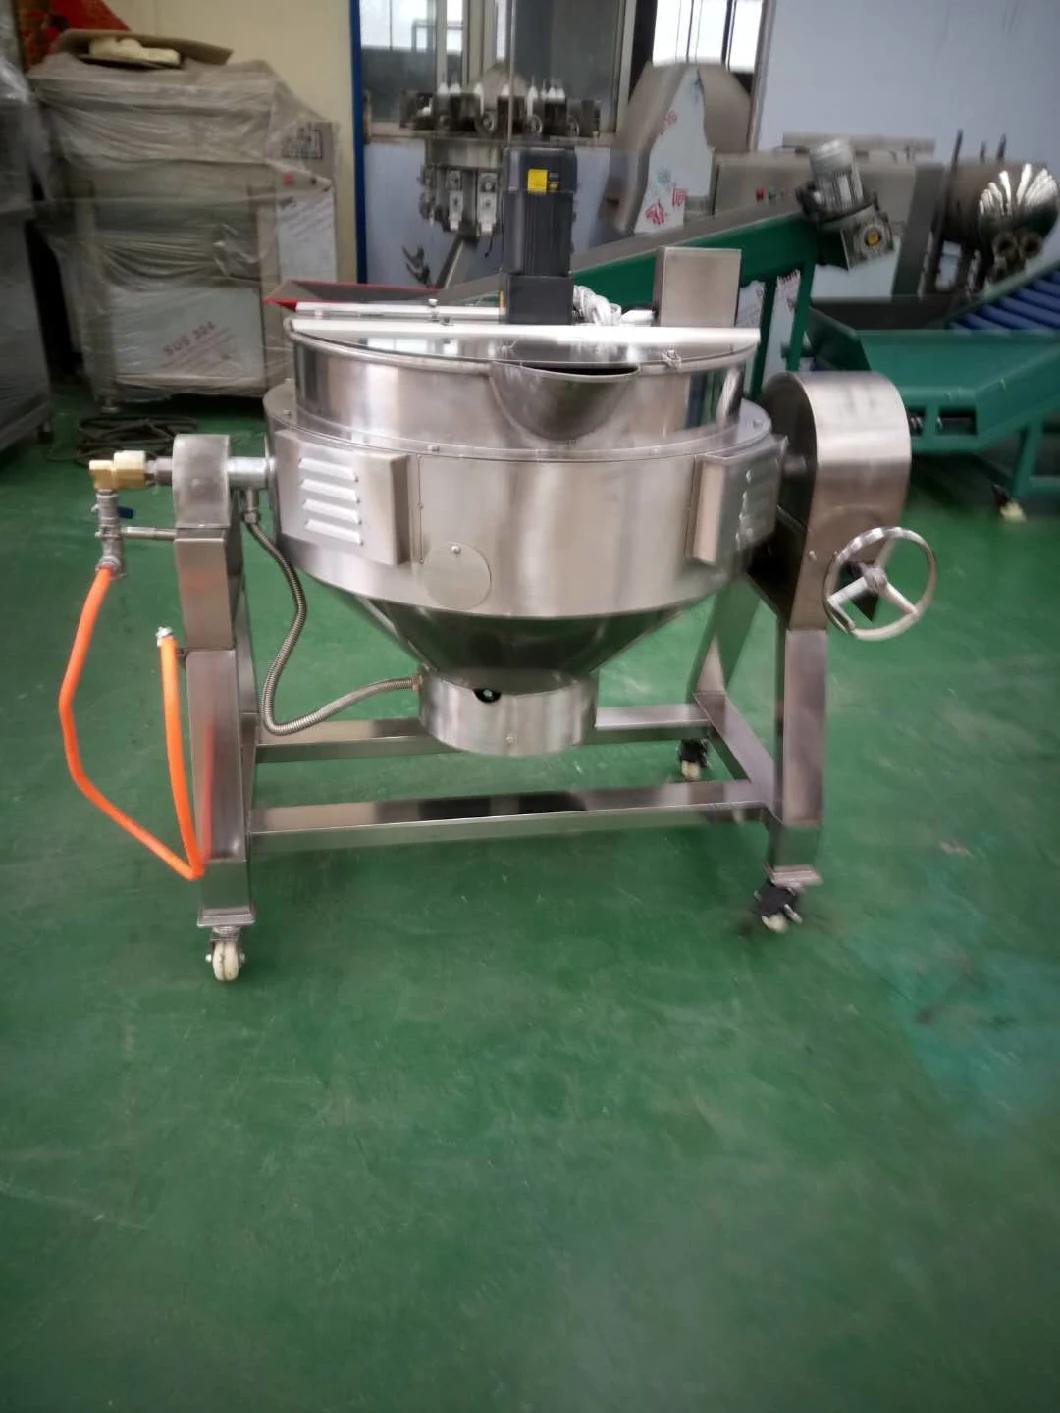 Steam Heating Jacketed Cooking Kettle Cooking Pot Electric Sandwich Pot Machine